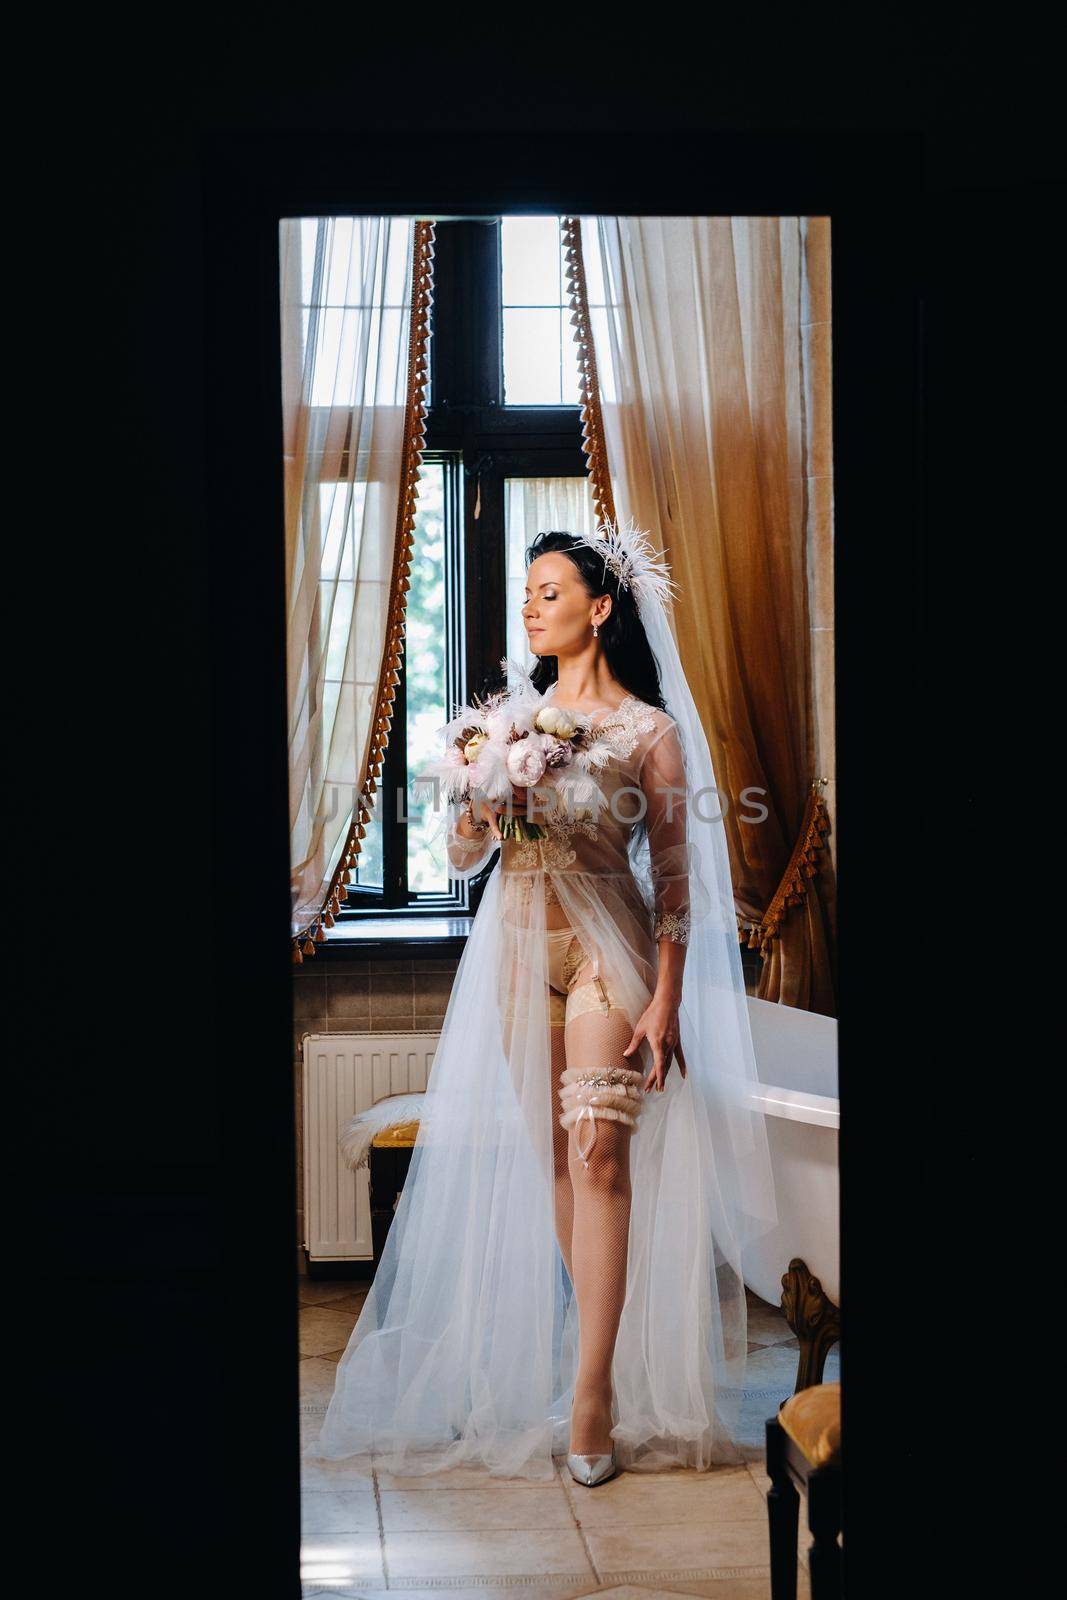 the bride, dressed in a boudoir transparent dress and underwear, sits near a vintage bath with a feather in her hands, The morning of the bride.